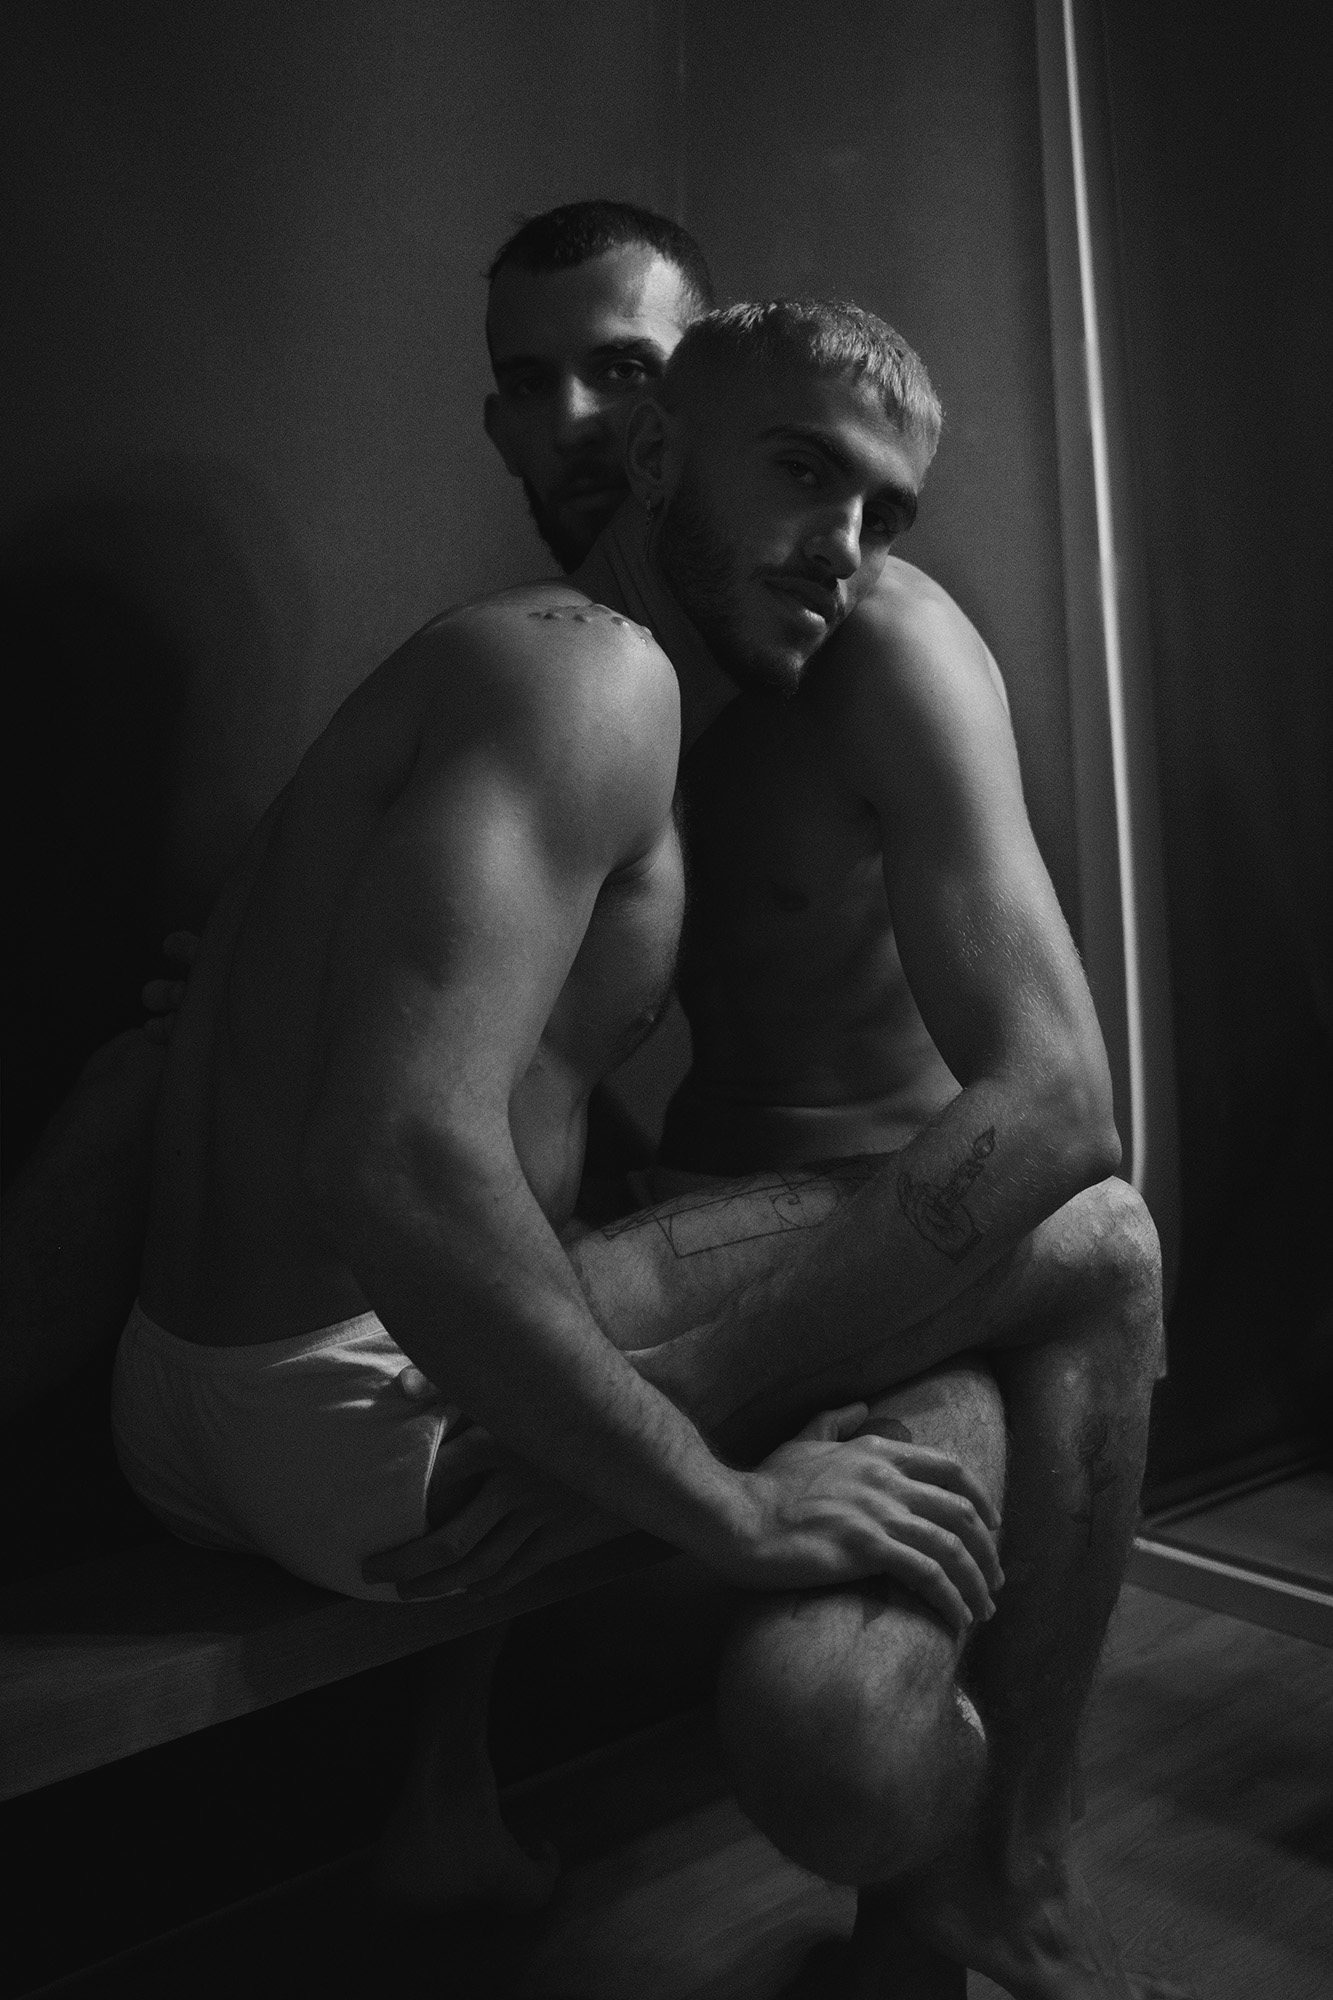 – «VALENTINE’S DAY (ANOTHER LOVE STORY)» – Alon E. & Kivvan by Eden Yerushalmy for Hair, Light & Shadow.